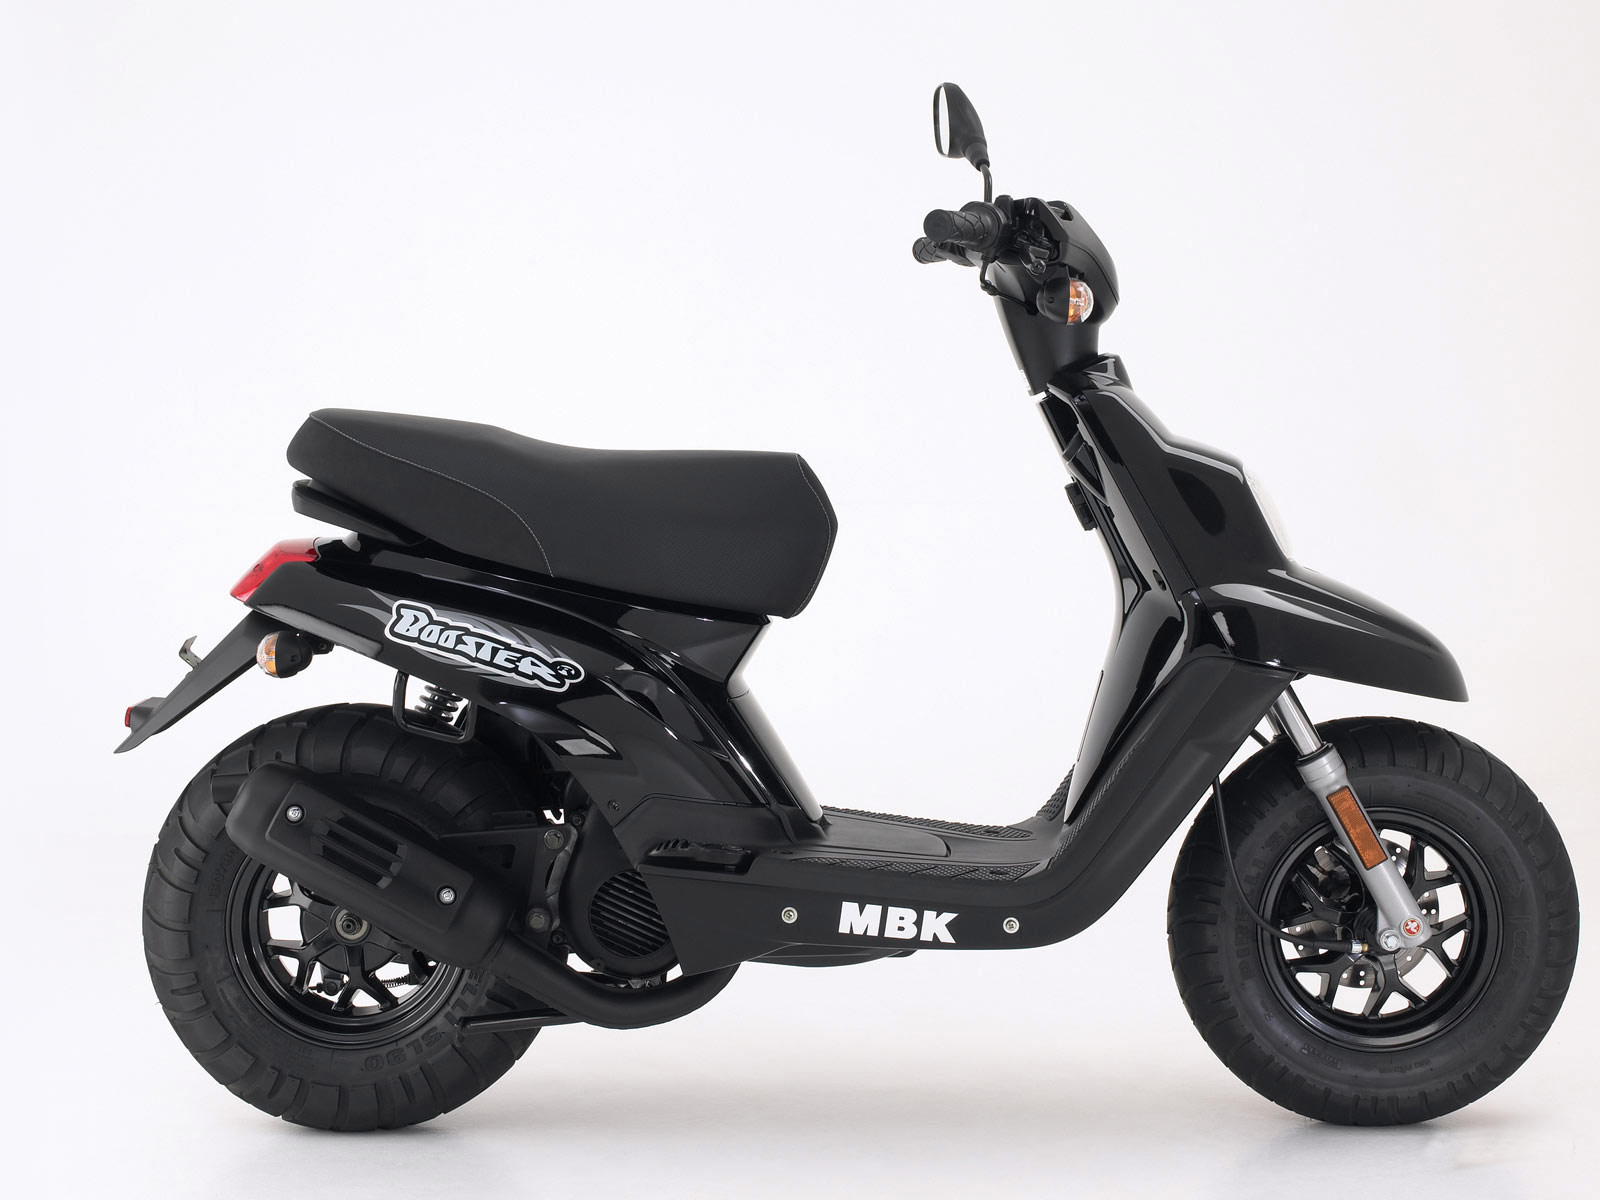 2005 MBK Booster Scooter Pictures, specifications